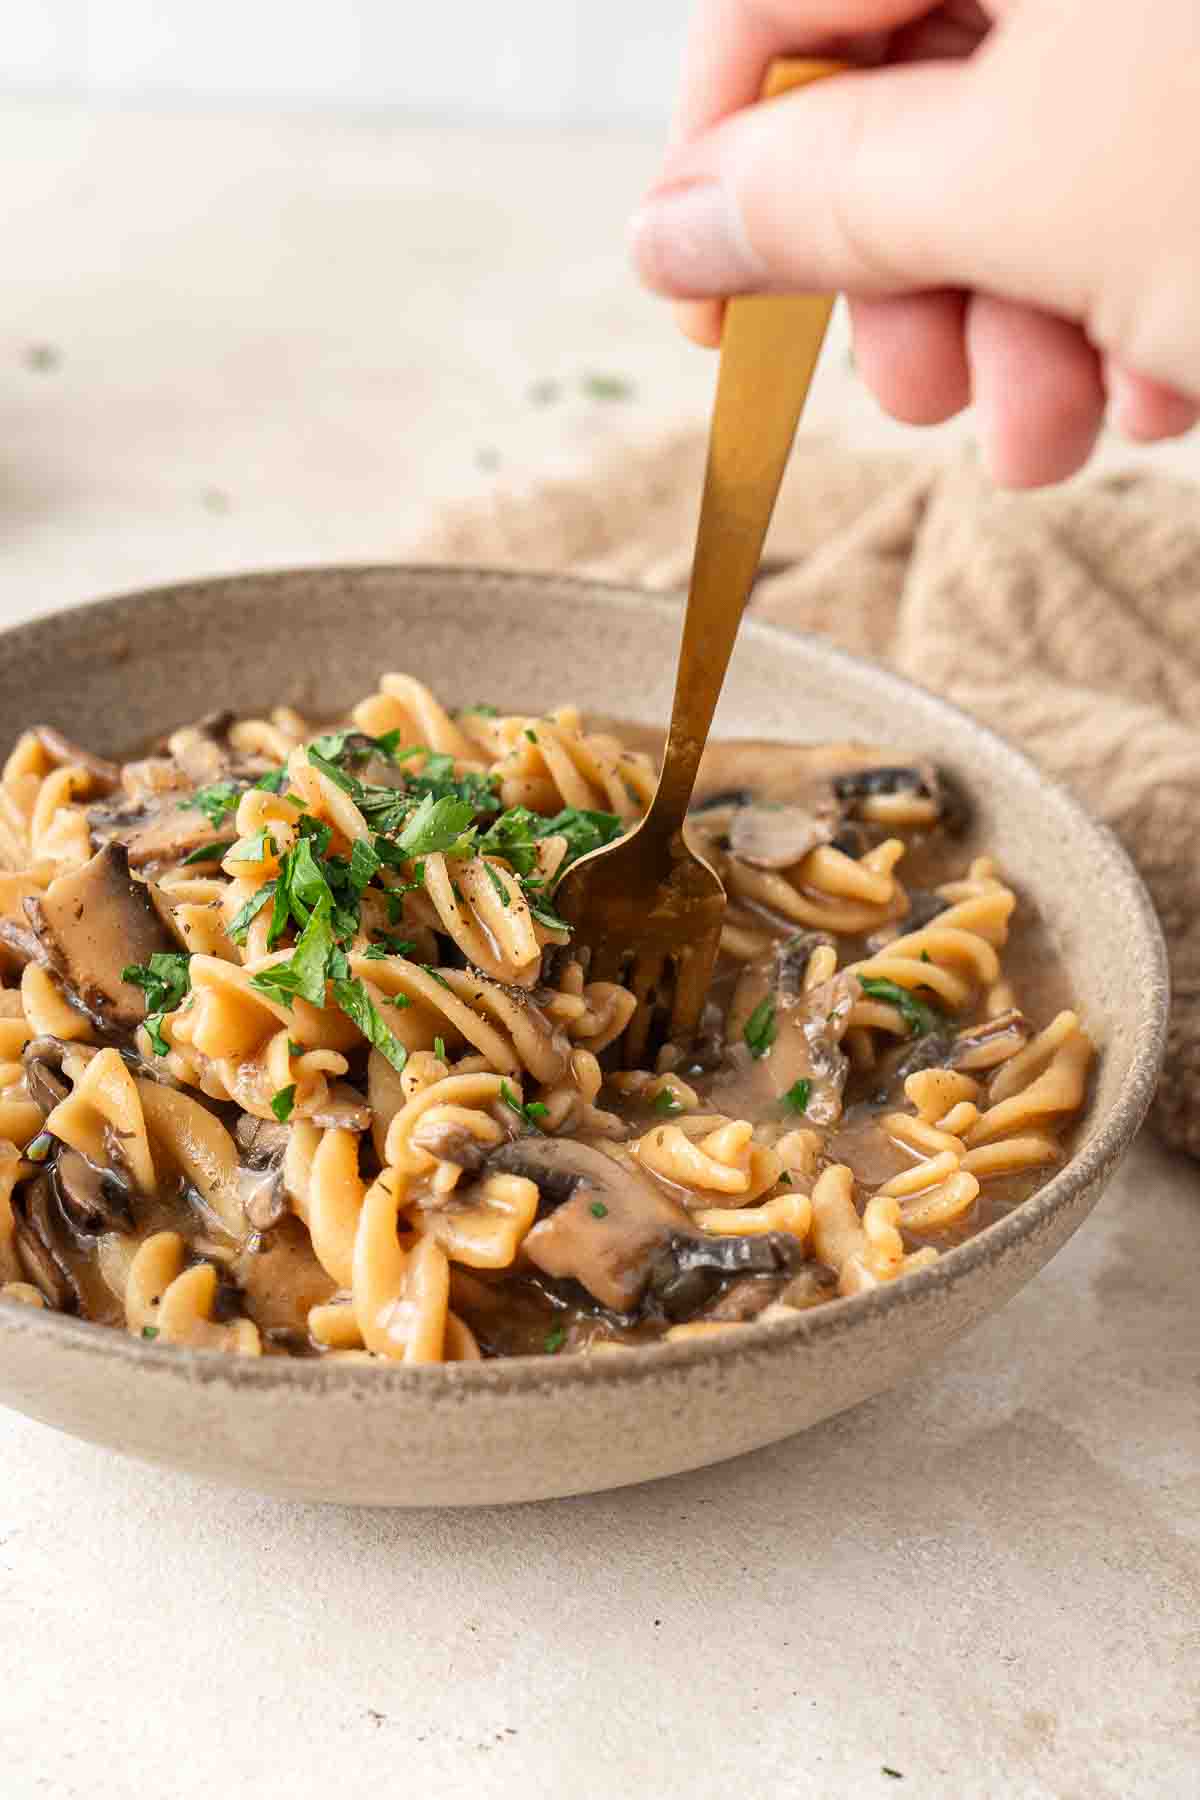 Close up of a fork taking a bite of mushroom stroganoff from a brown bowl.